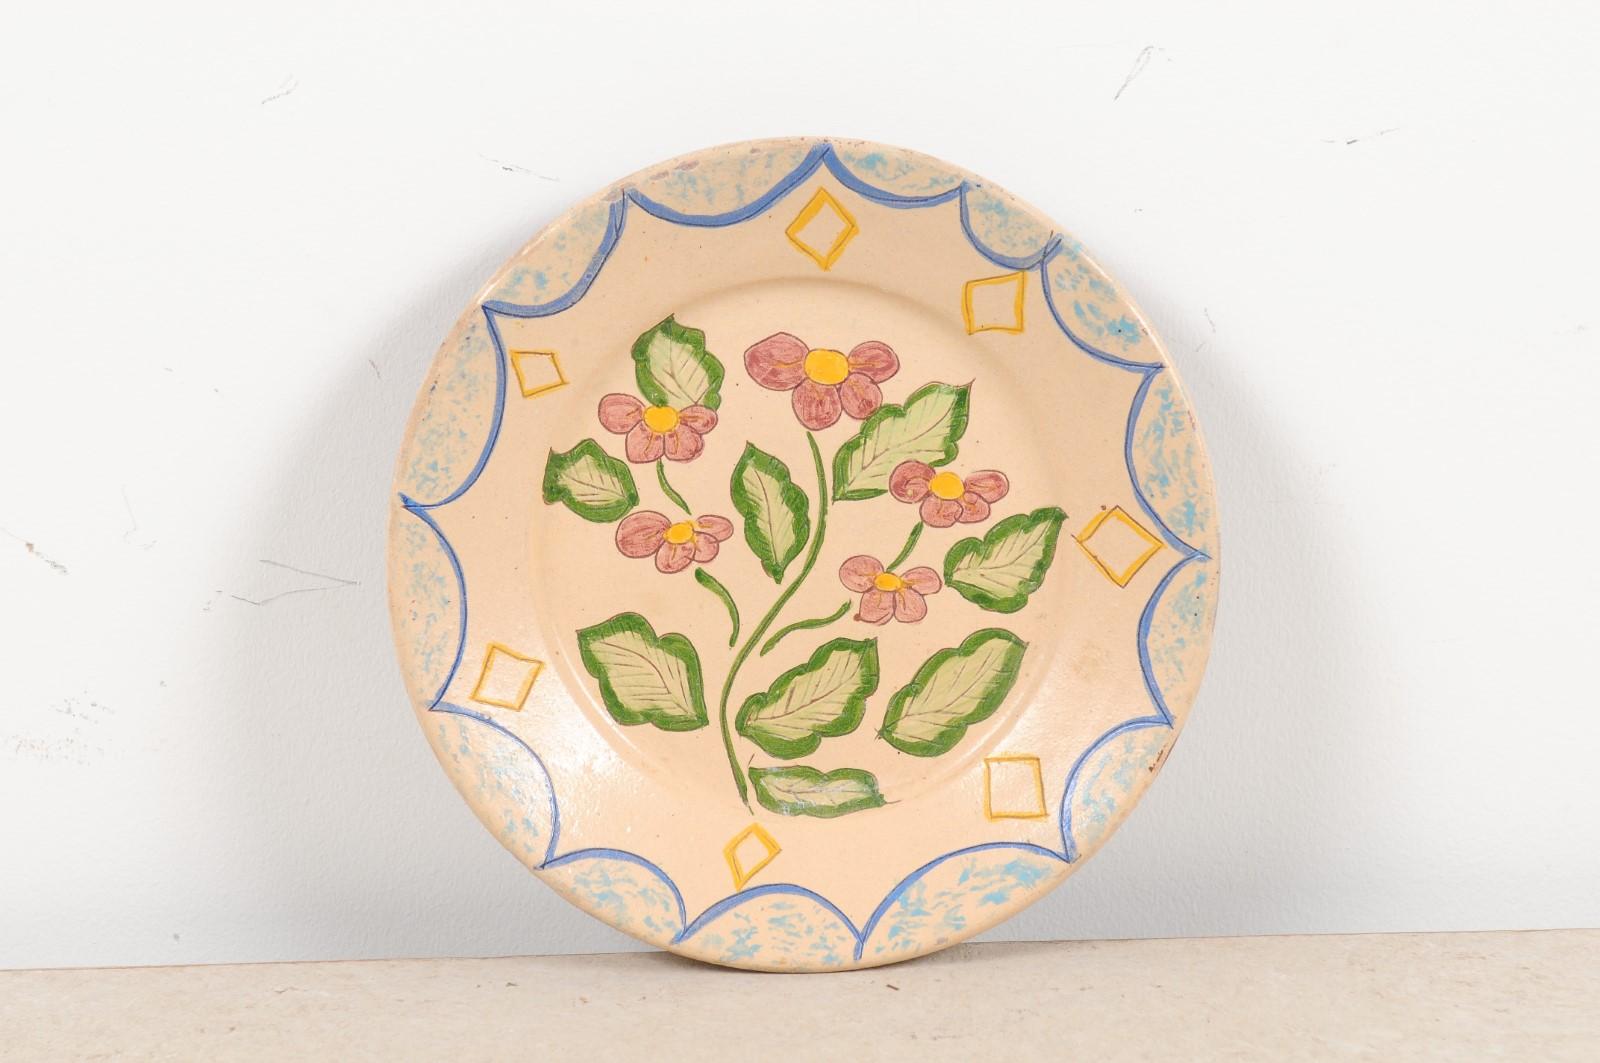 A Portuguese early 20th century painted clay pottery plate from Sao Pedro do Corval, with floral decor. Created in one of the largest Portuguese pottery centers during the early years of the 20th century, this painted clay plate charms us with its